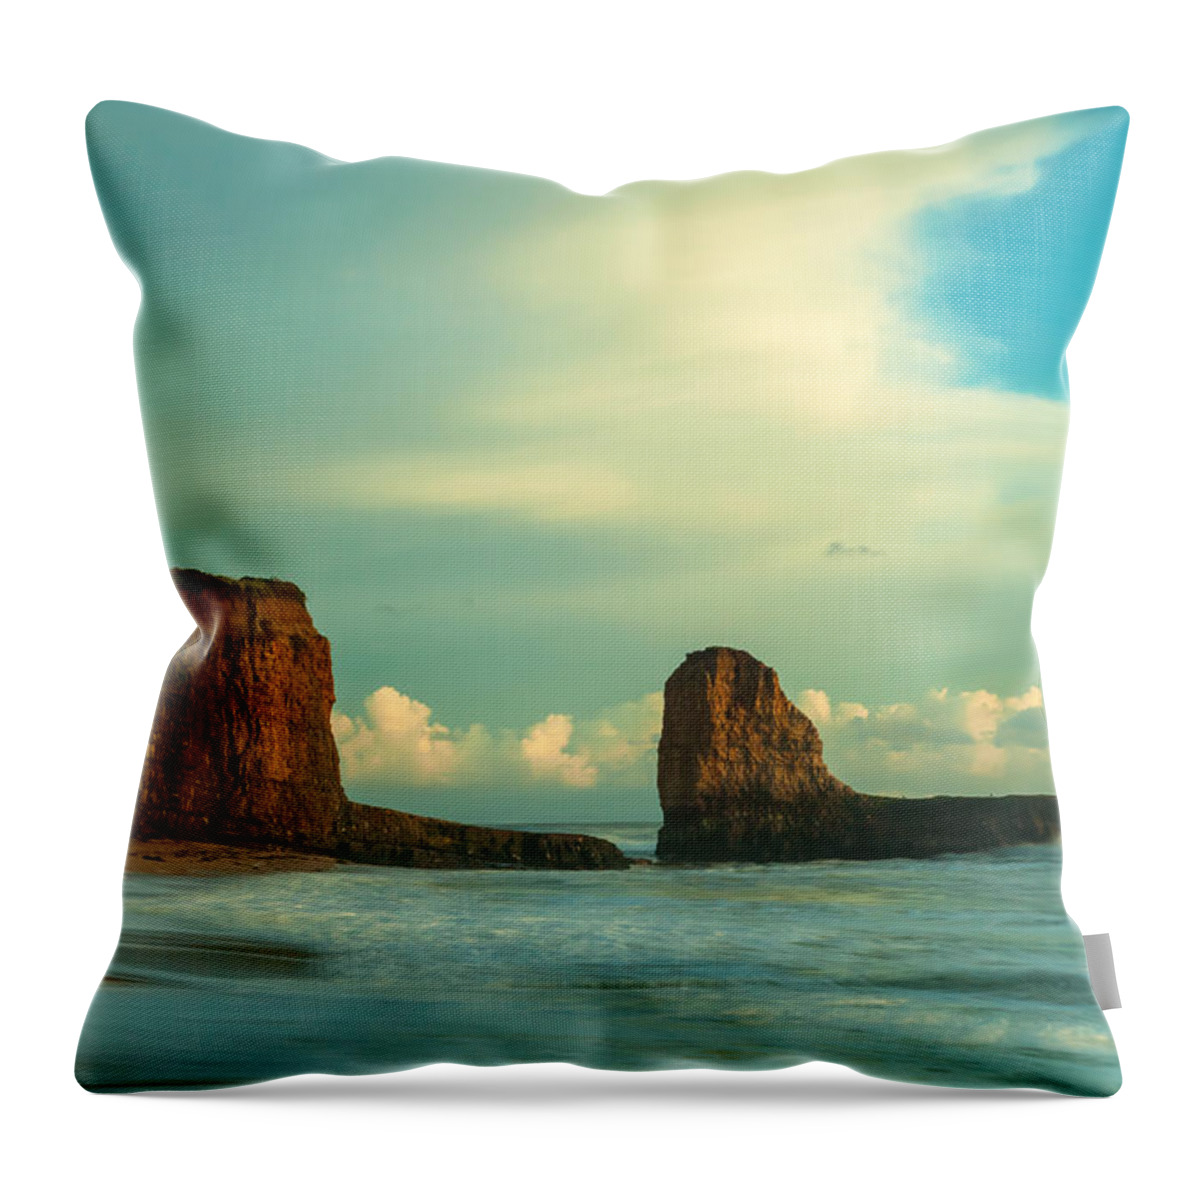 Landscape Throw Pillow featuring the photograph The Towers by Jonathan Nguyen